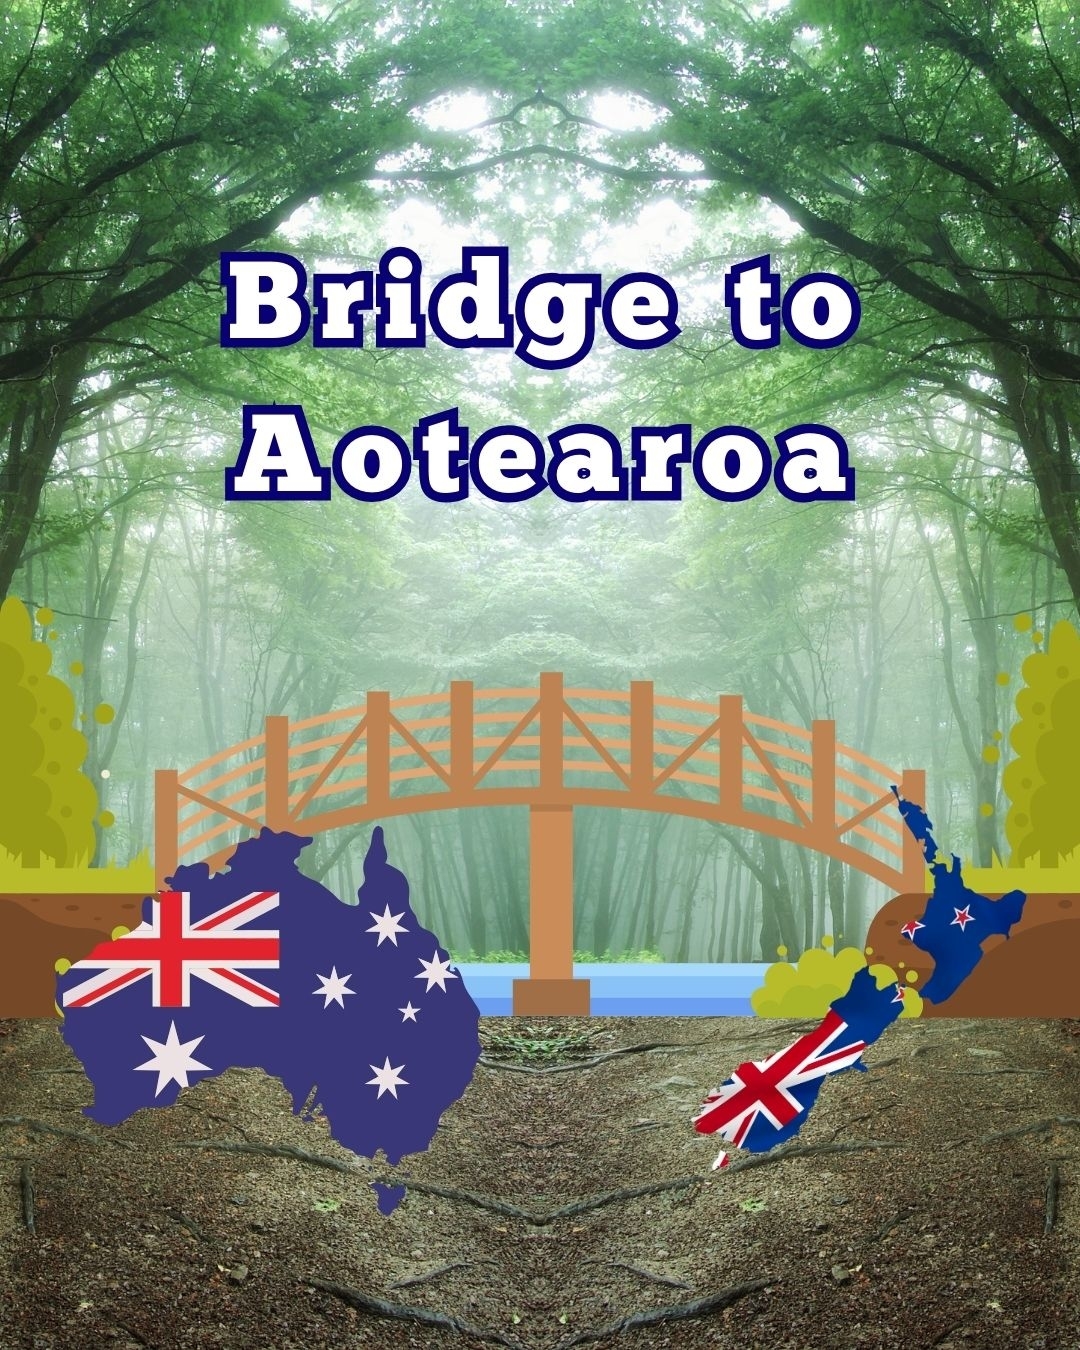 Illustration of a bridge with &quot;Bridge to Aotearoa&quot; text, connecting Australia and New Zealand maps